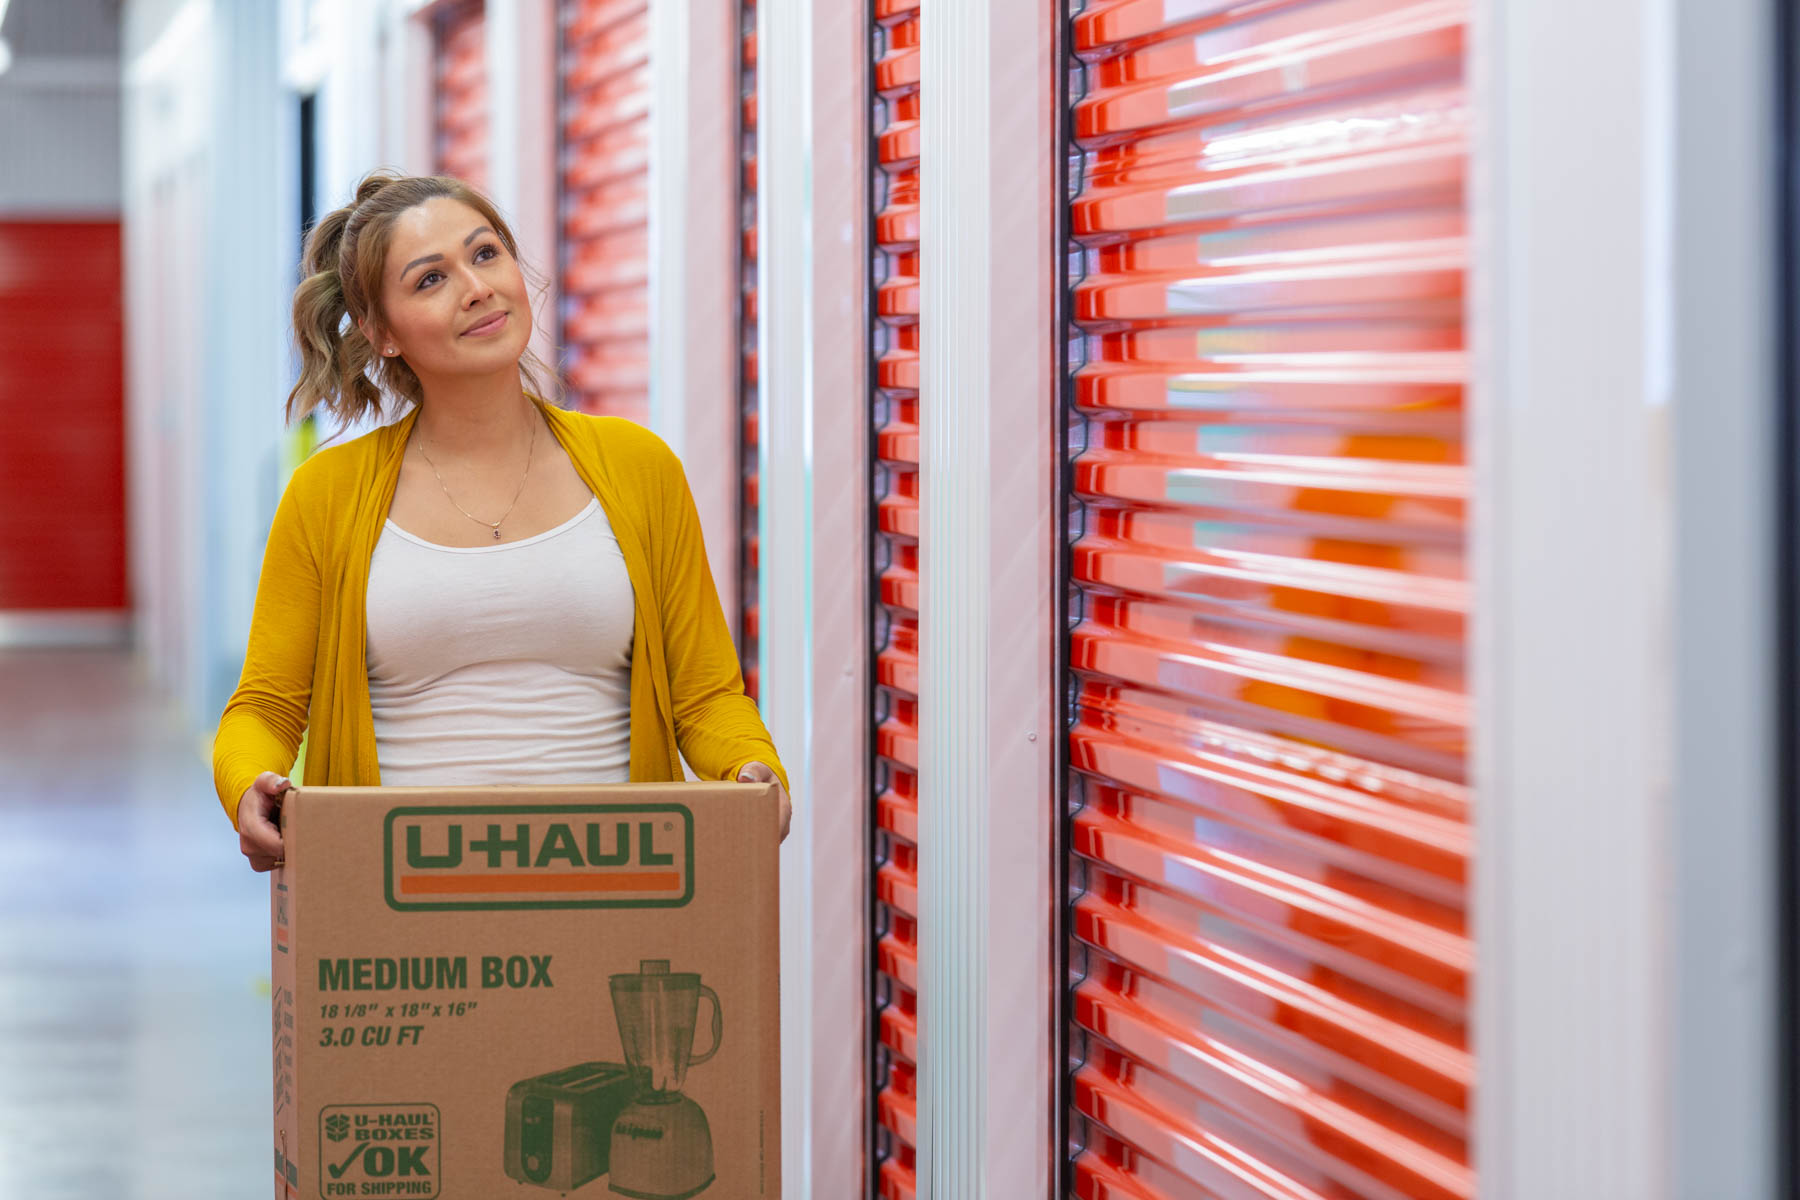 U-Haul Extends 30 Days Free Self-Storage at All Texas Stores